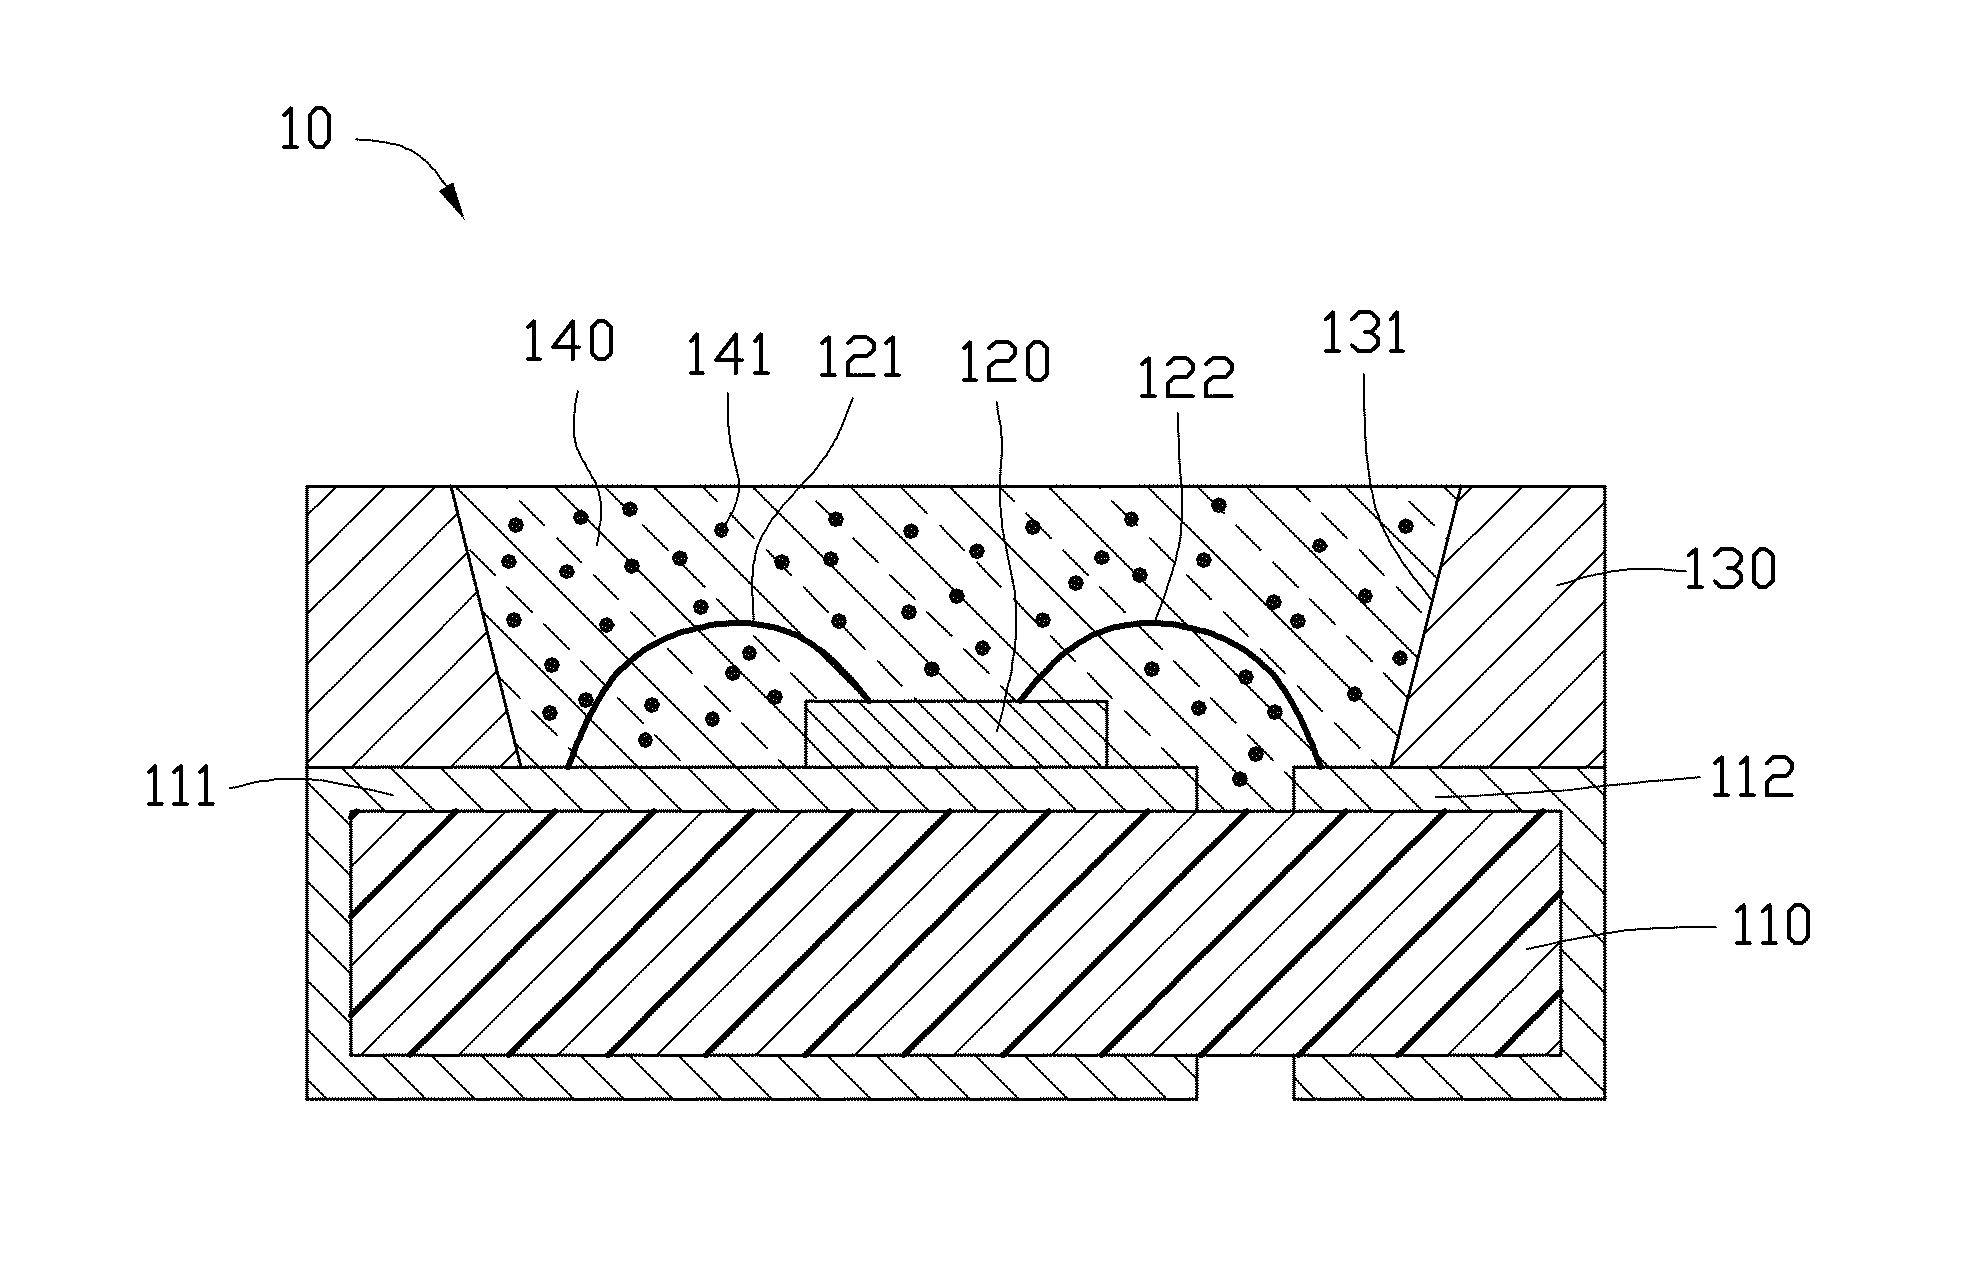 Light emitting diode package structure having a substrate including ceramic fibers